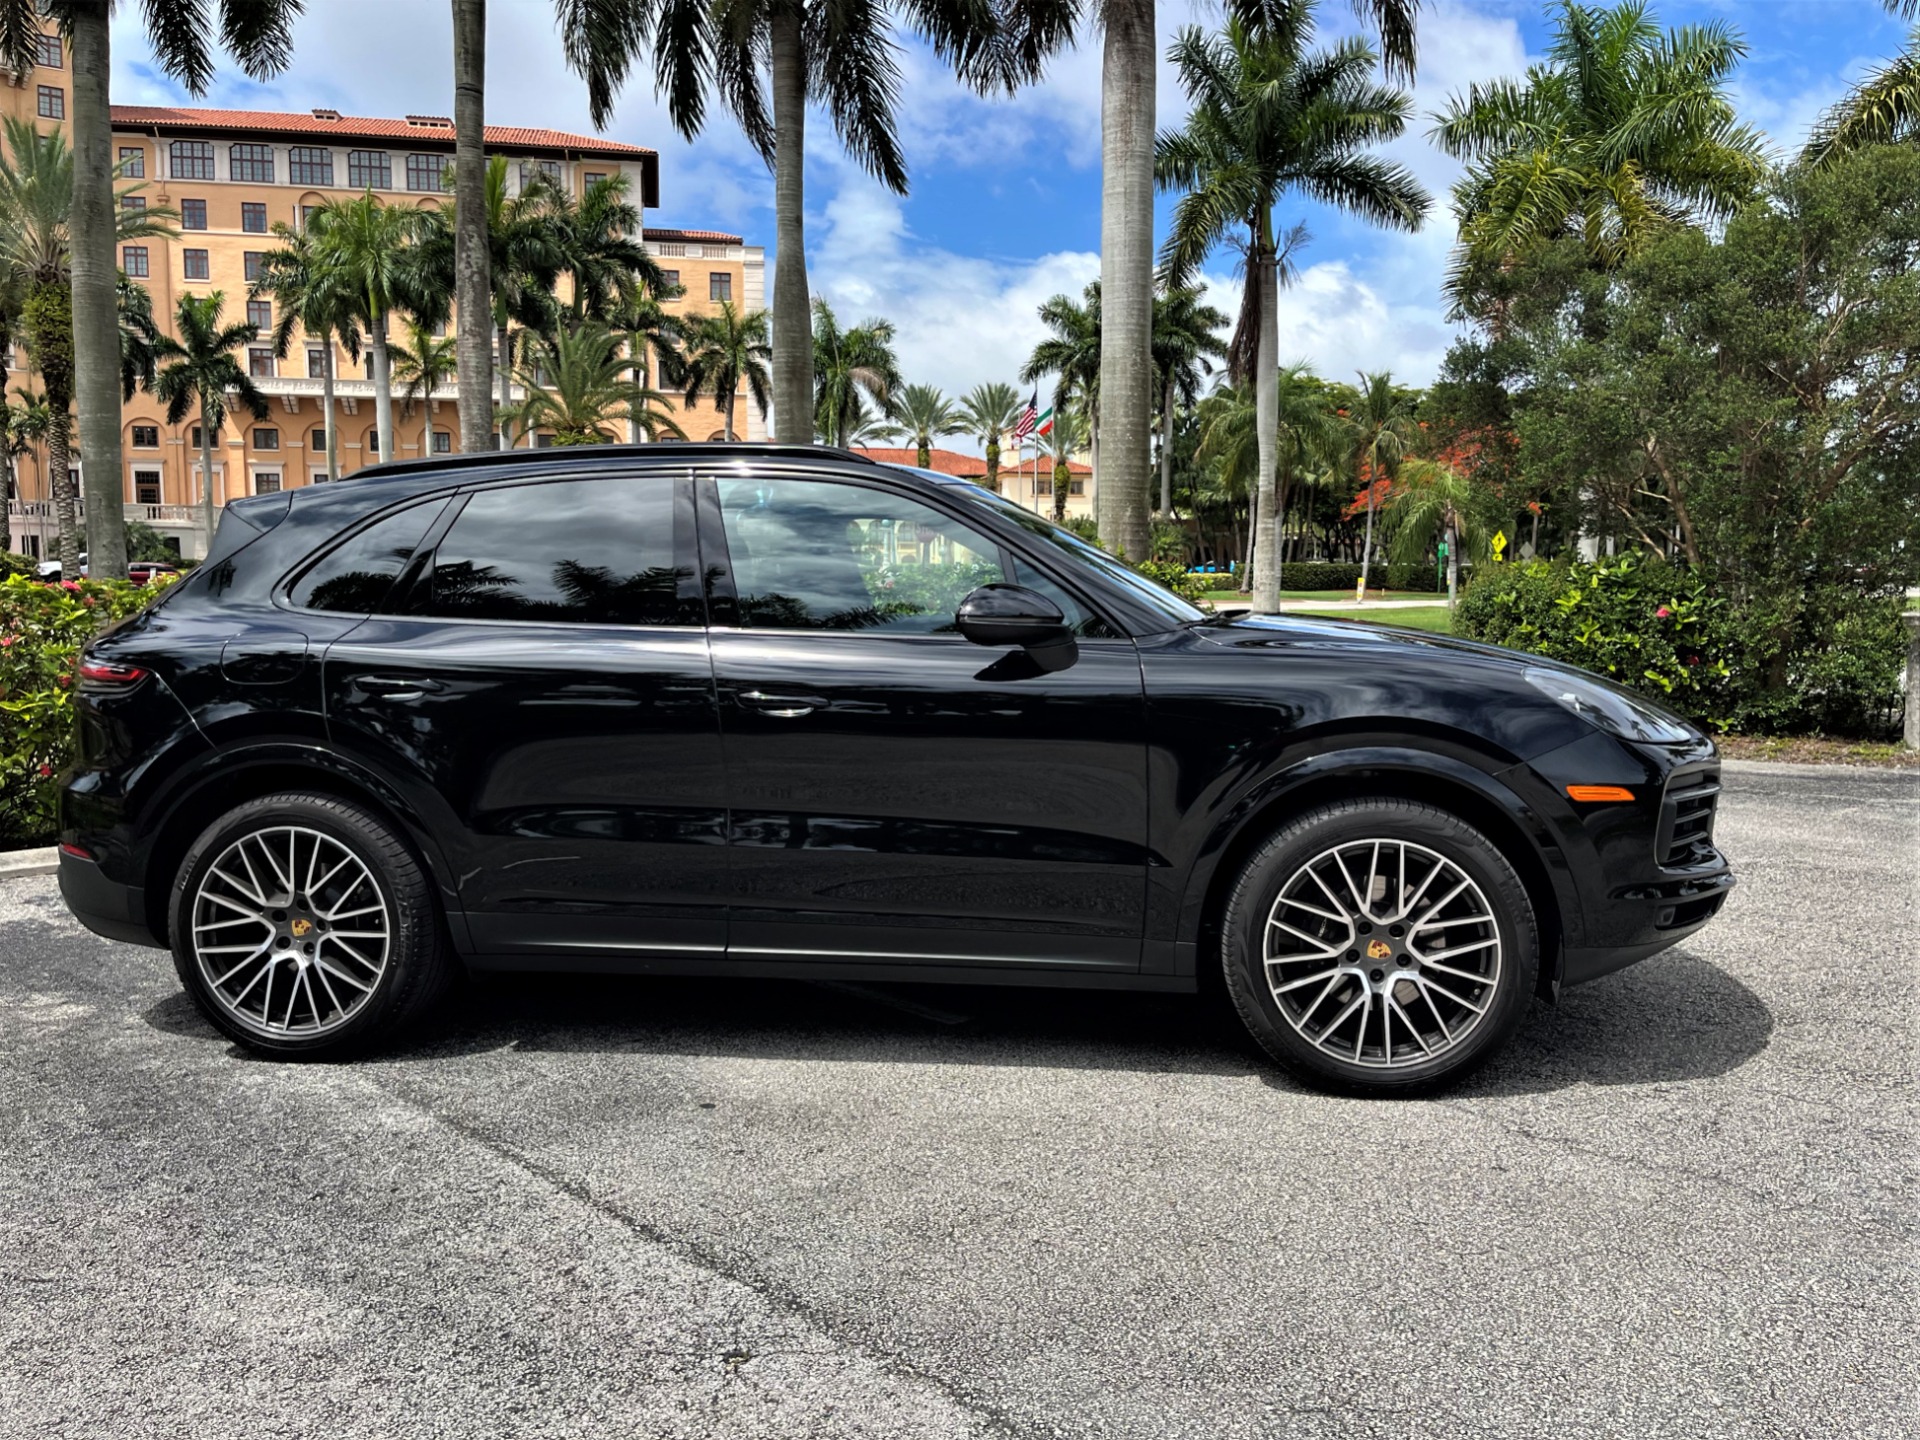 Used 2020 Porsche Cayenne for sale $78,850 at The Gables Sports Cars in Miami FL 33146 4